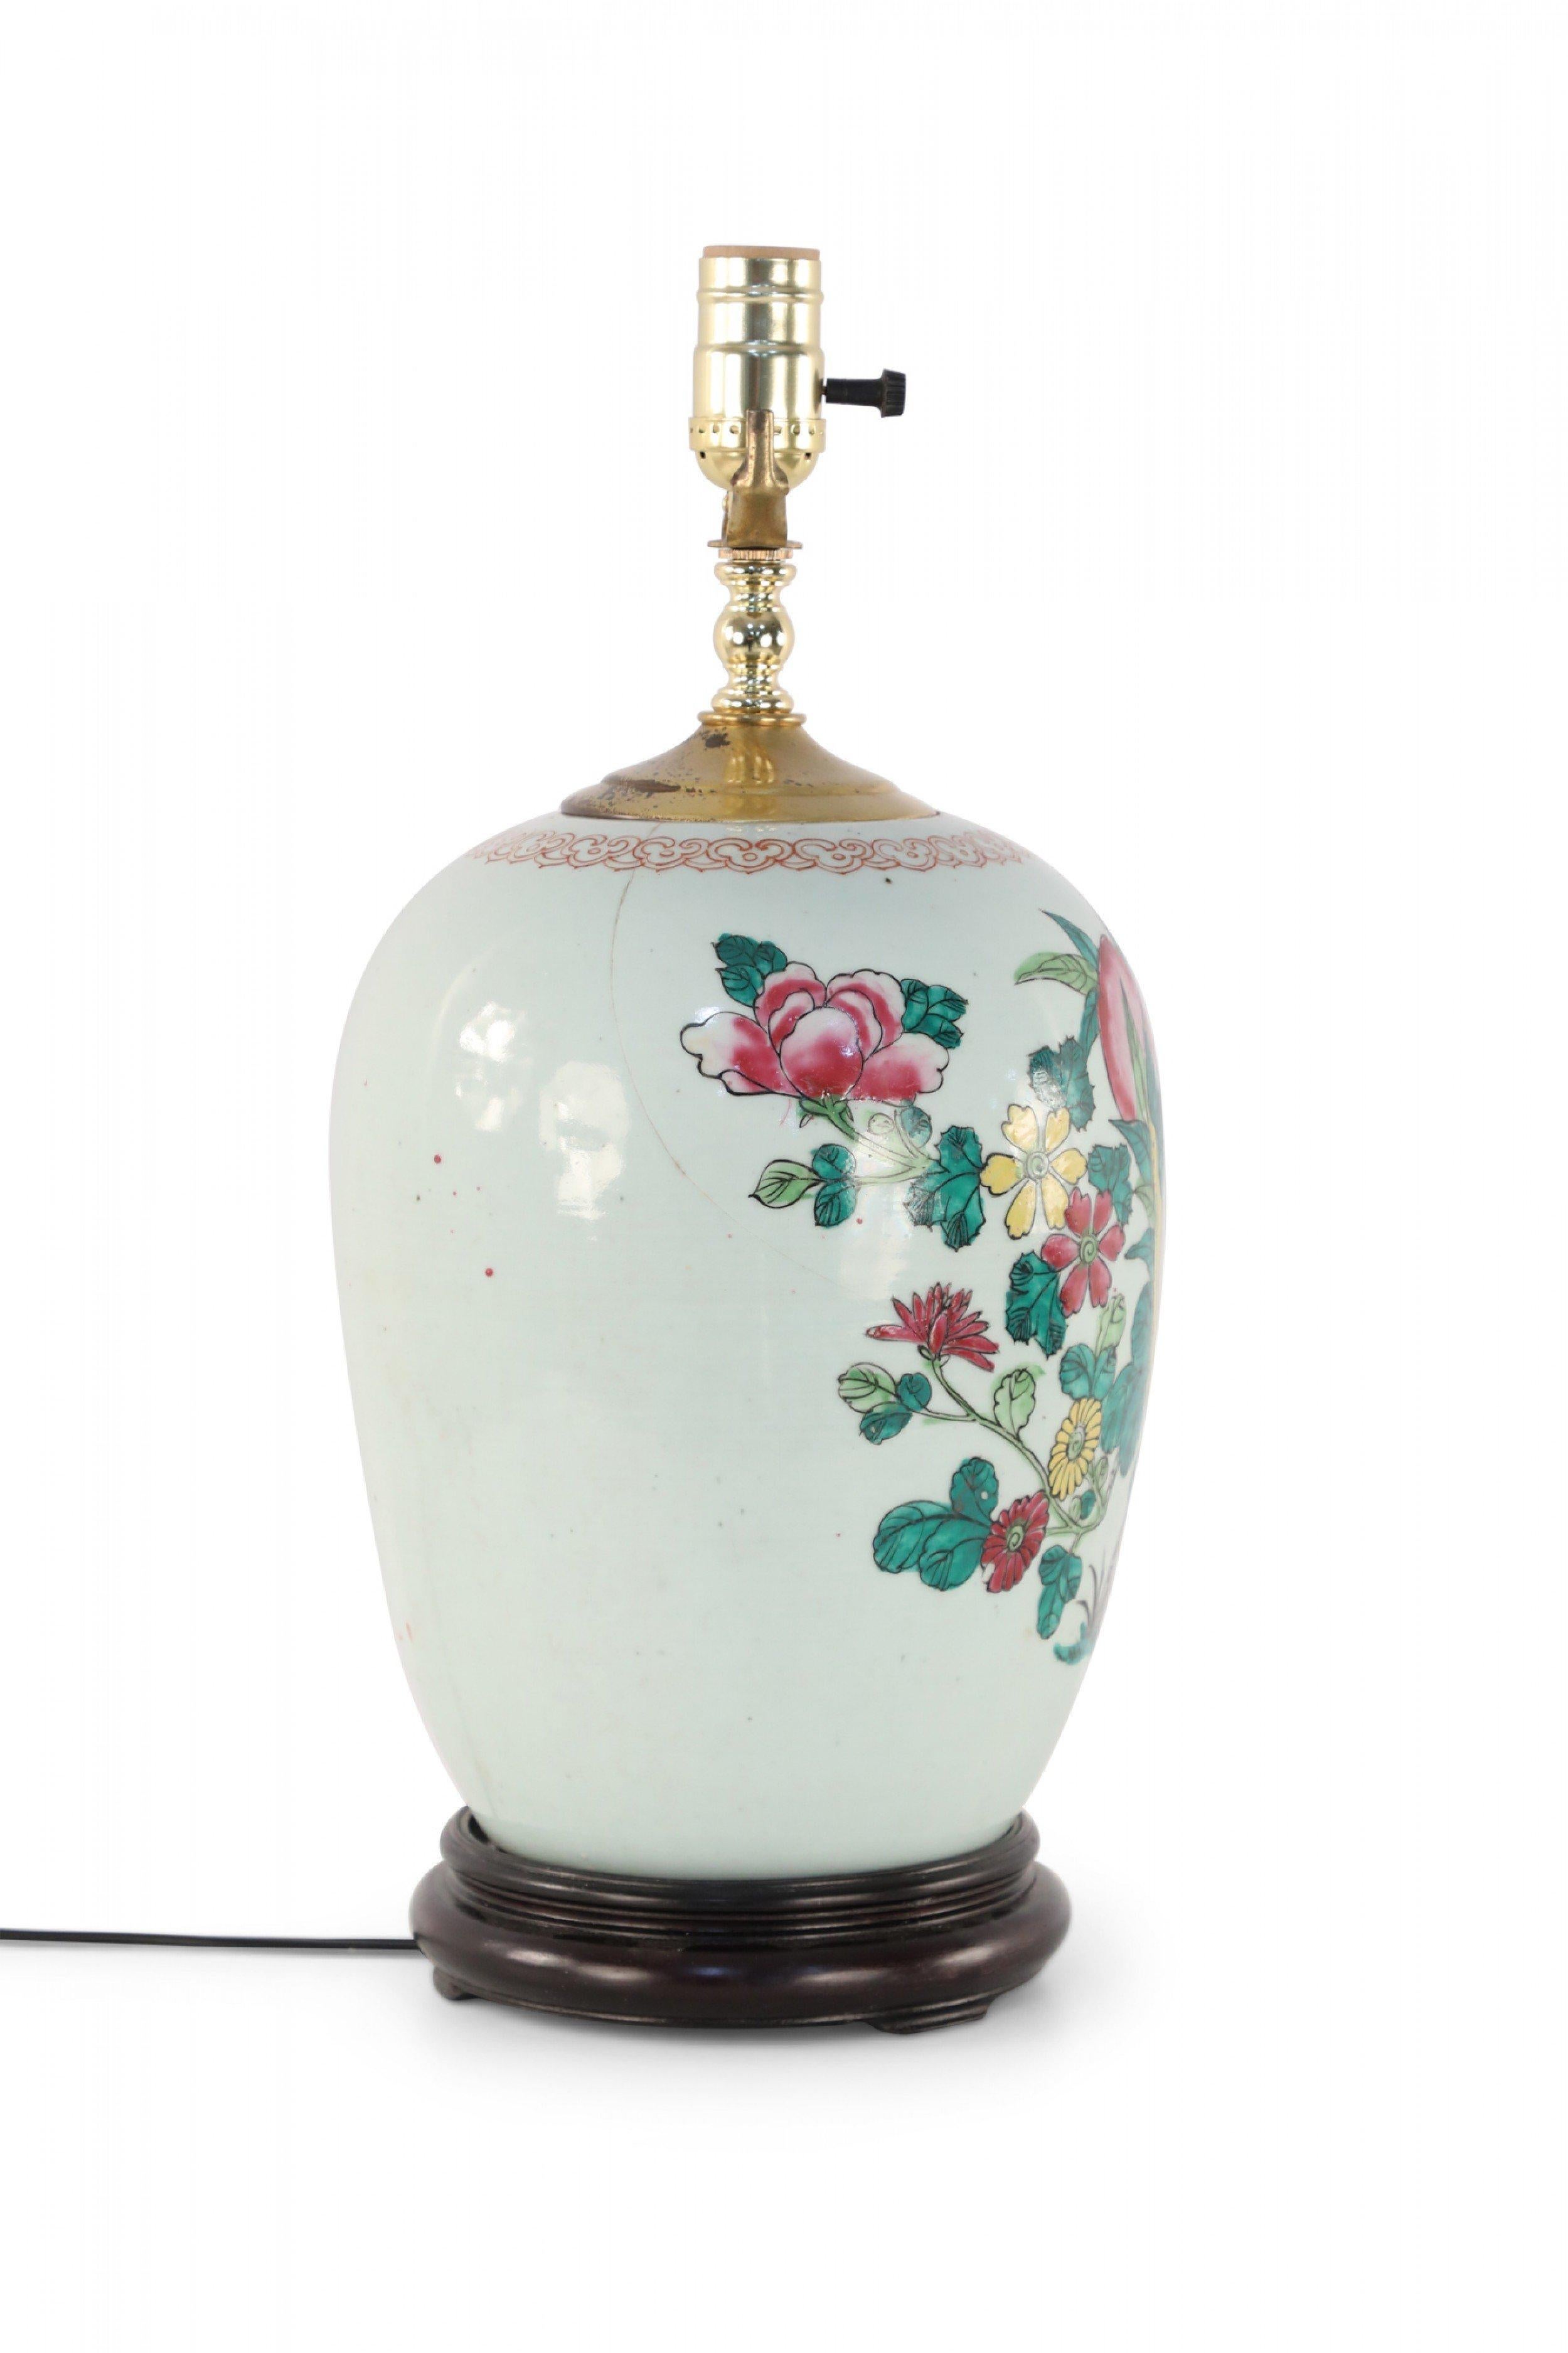 Metal Chinese White Floral Patterned Porcelain Table Lamp For Sale